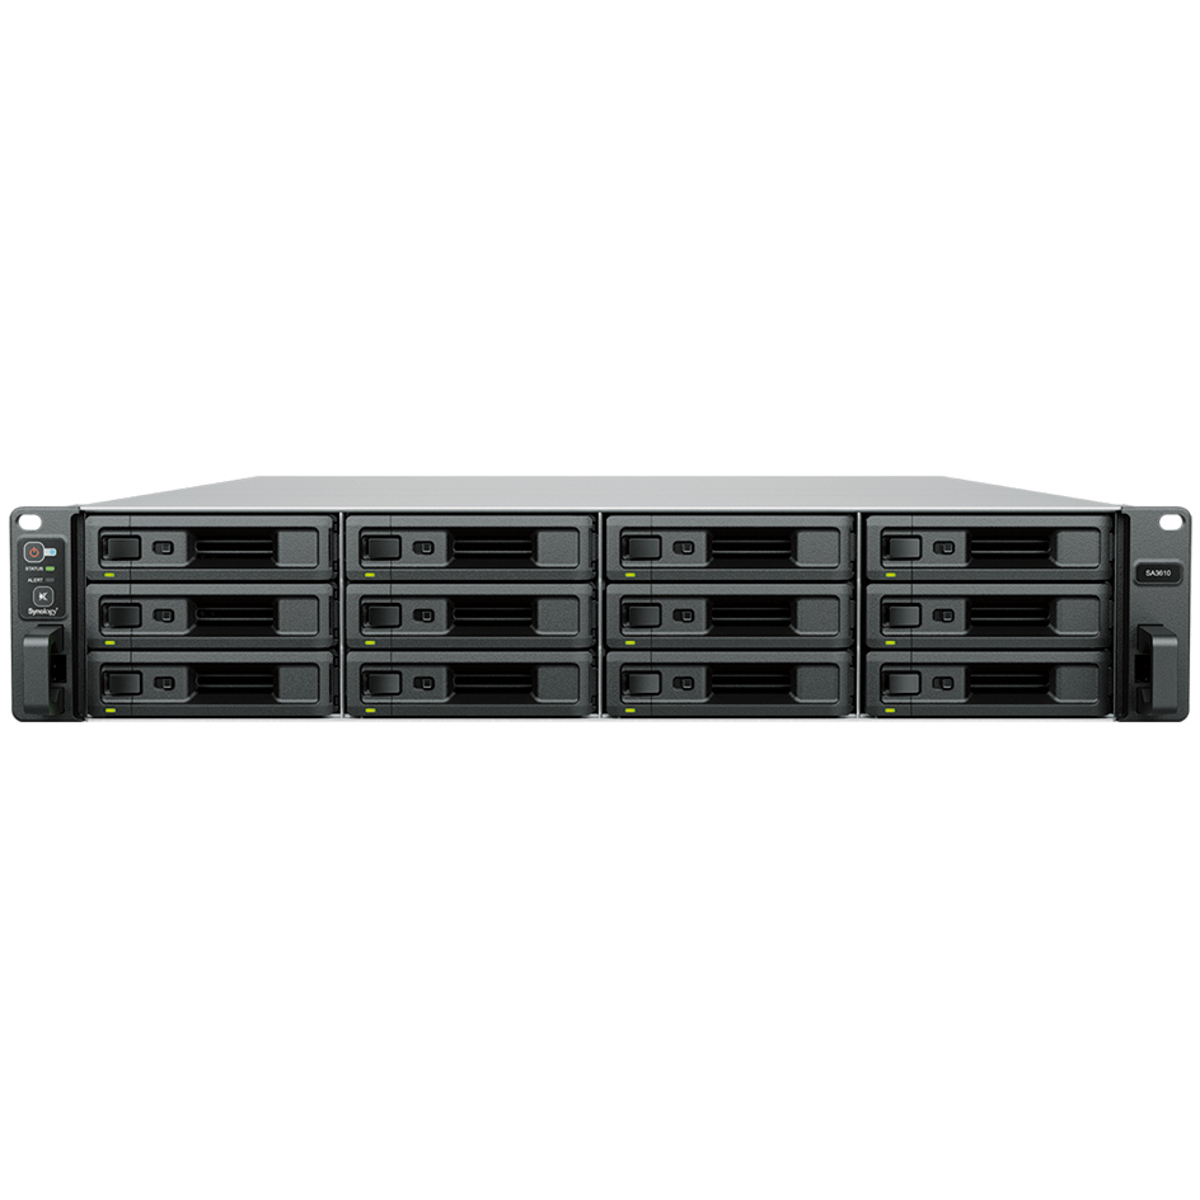 Synology RackStation SA3610 20tb 12-Bay RackMount Large Business / Enterprise NAS - Network Attached Storage Device 10x2tb Western Digital Red Plus WD20EFZX 3.5 5400rpm SATA 6Gb/s HDD NAS Class Drives Installed - Burn-In Tested RackStation SA3610